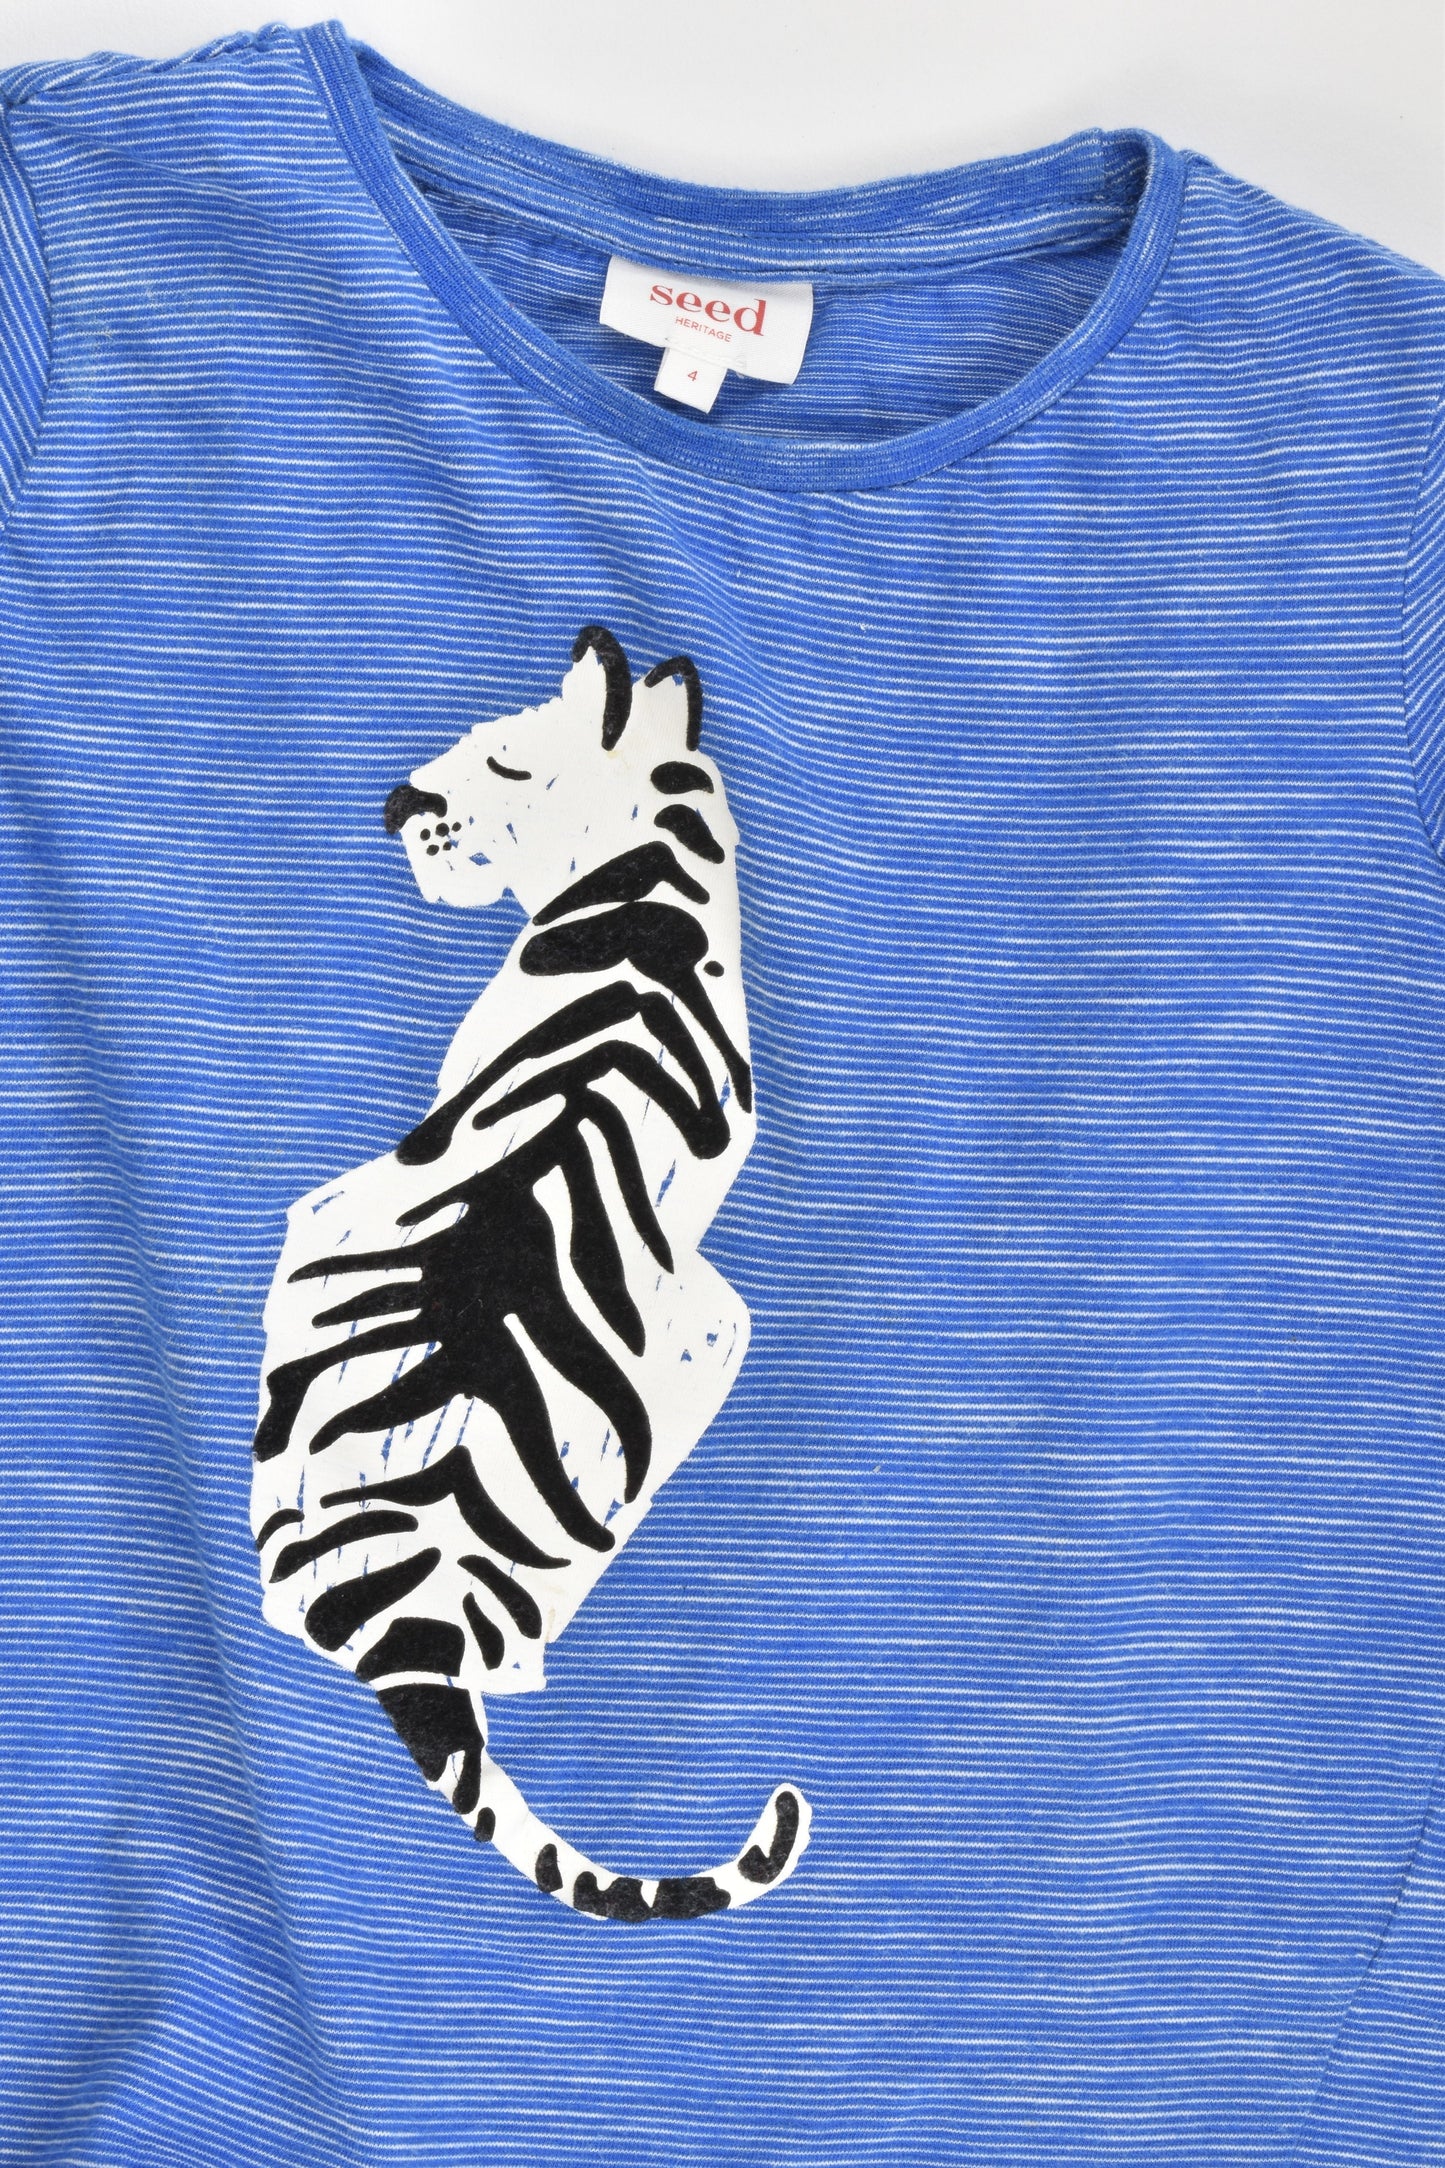 Seed Size 4 T-shirt